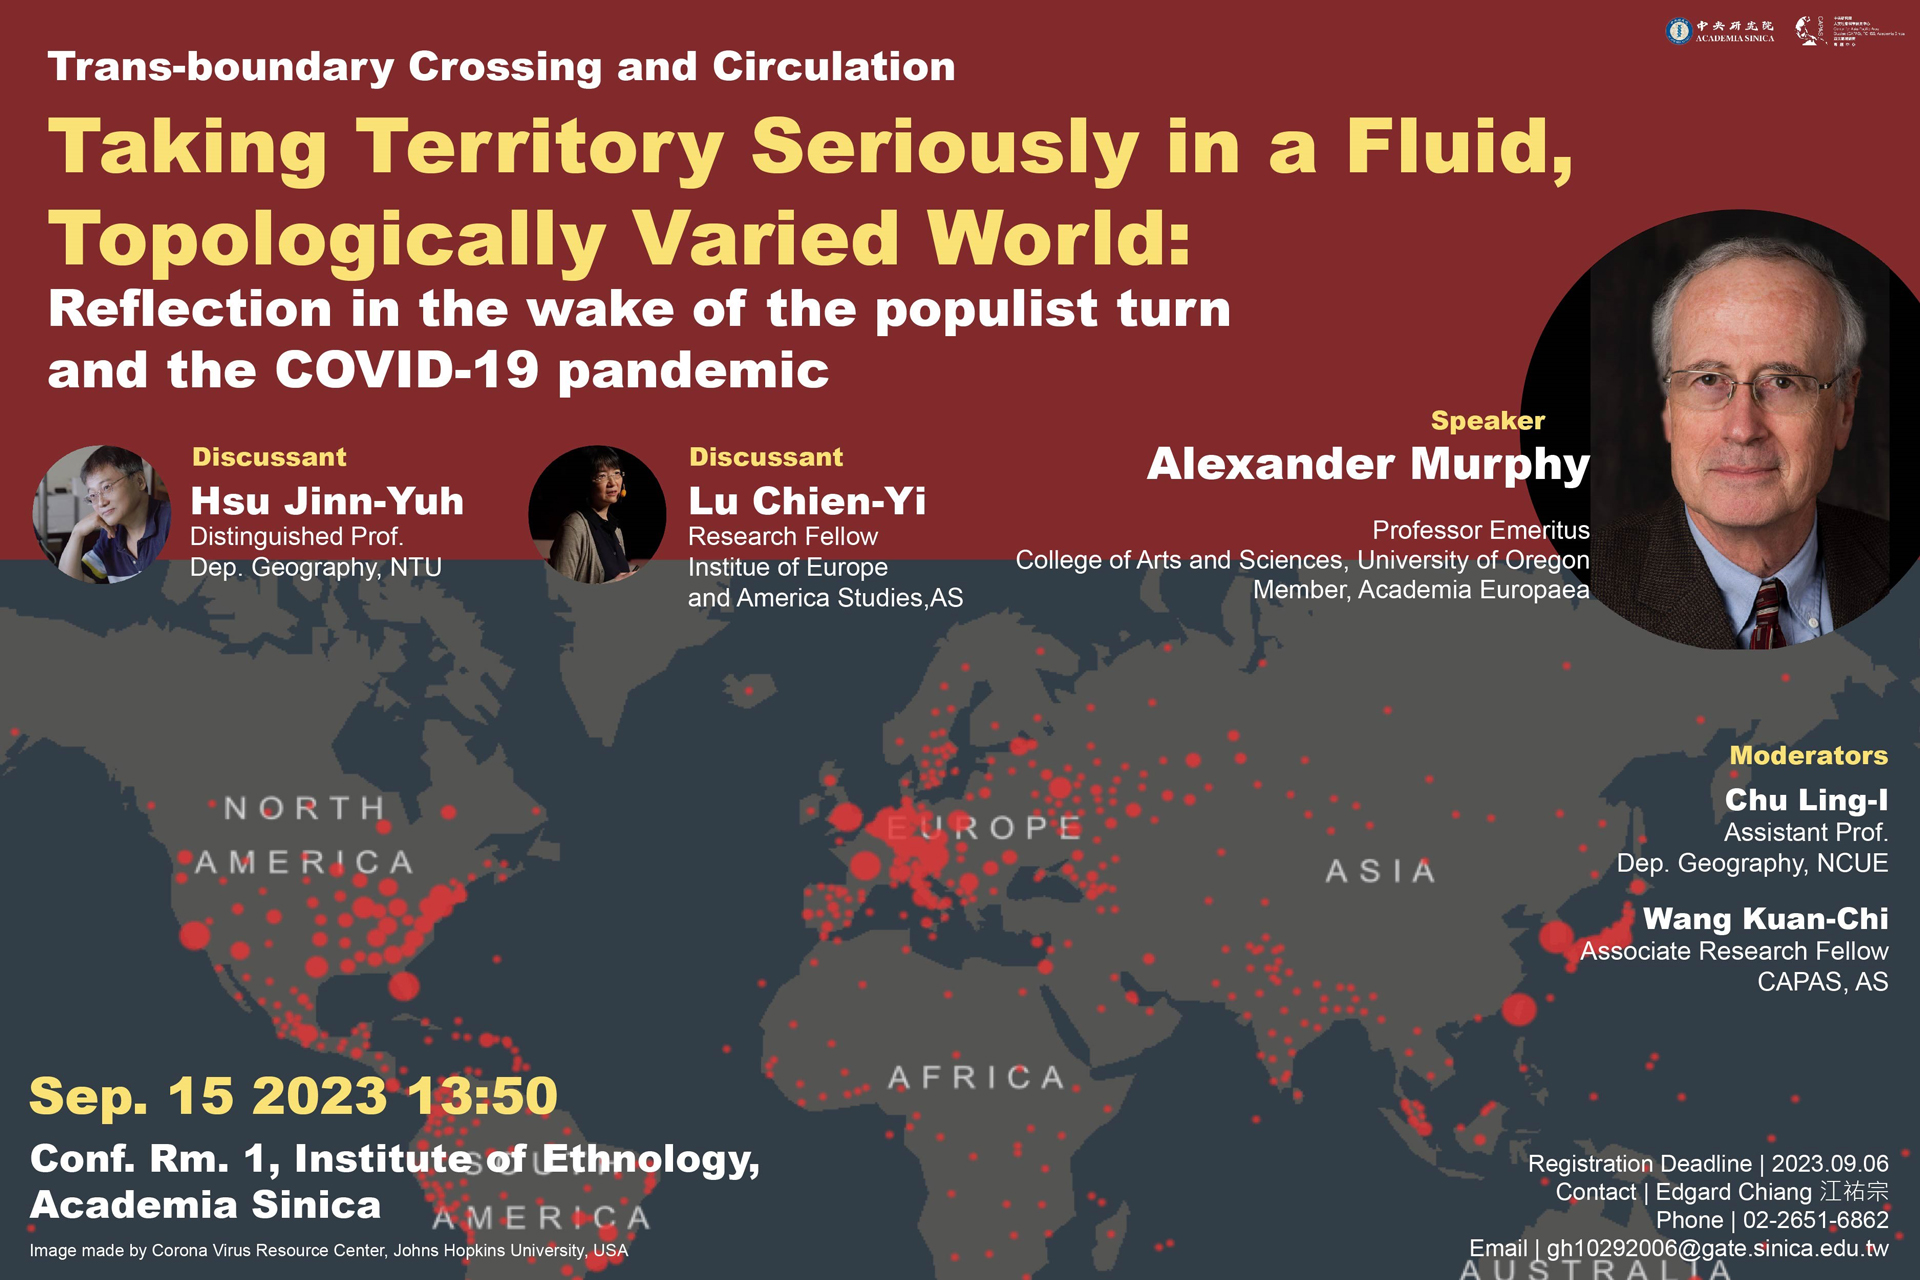 Special Lecture Series on Trans-boundary Crossing and Circulation: Taking Territory Seriously in a Fluid, Topologically Varied World: Reflections in the wake of the populist turn and the COVID-19 pandemic